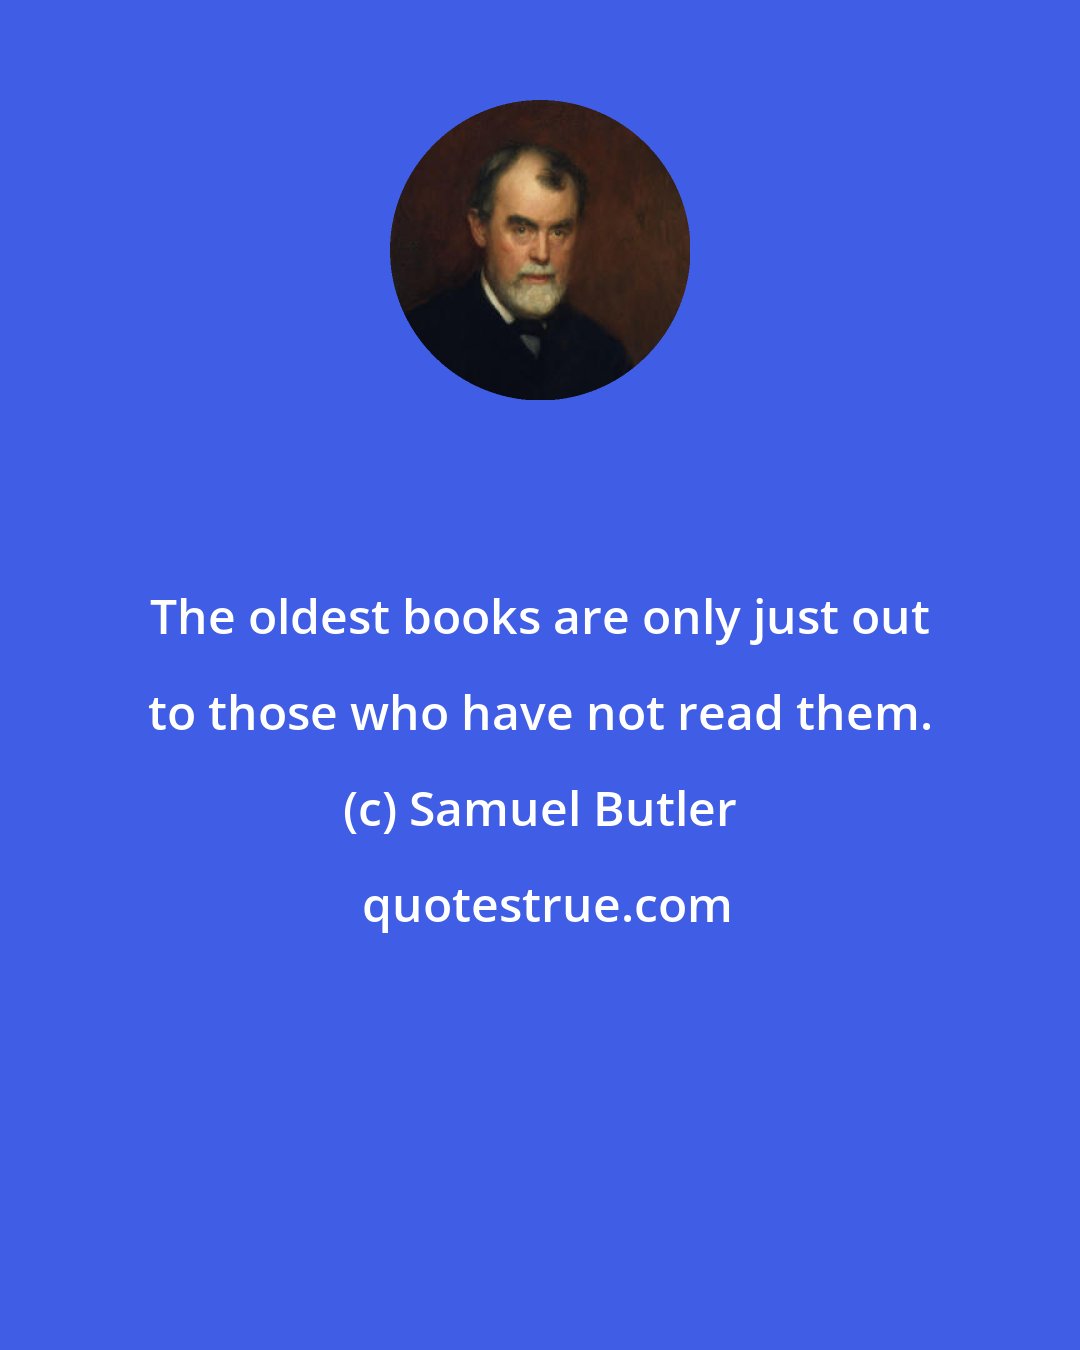 Samuel Butler: The oldest books are only just out to those who have not read them.